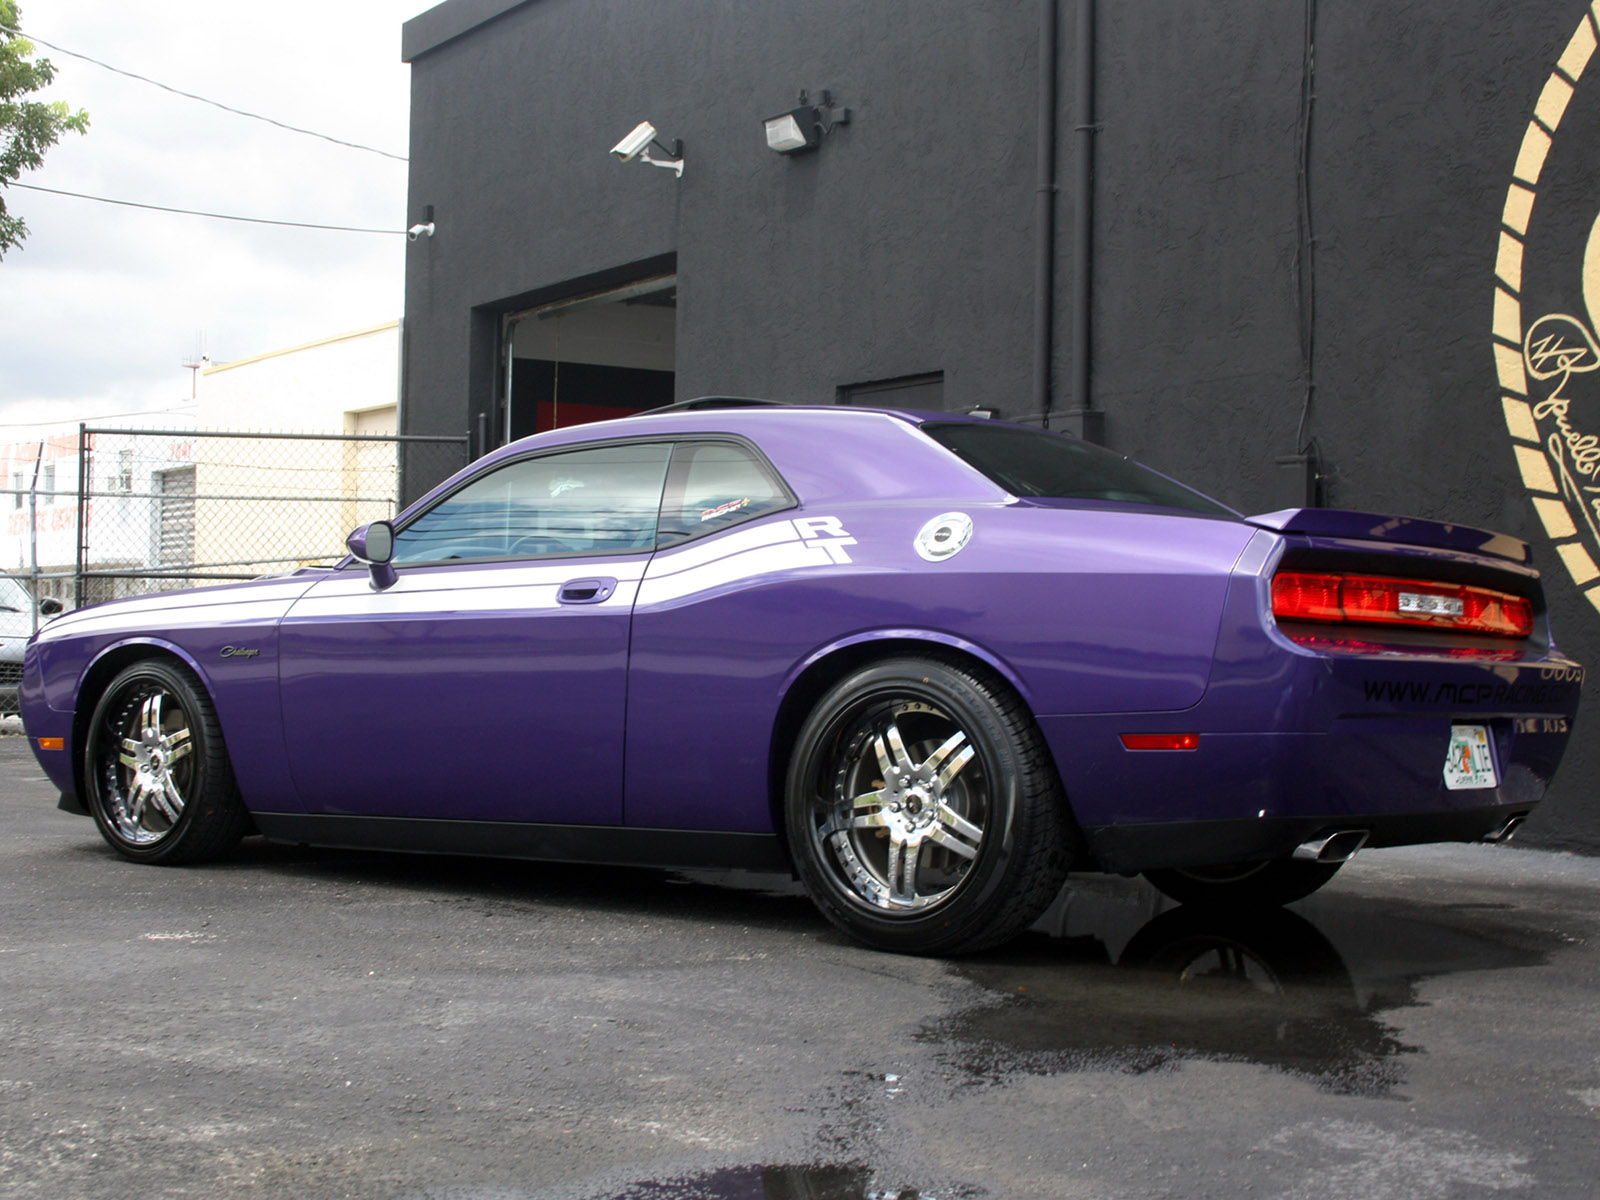 2009, Mcp racing, Dodge, Challenger, R t, Muscle, Supercar, Supercars Wallpaper